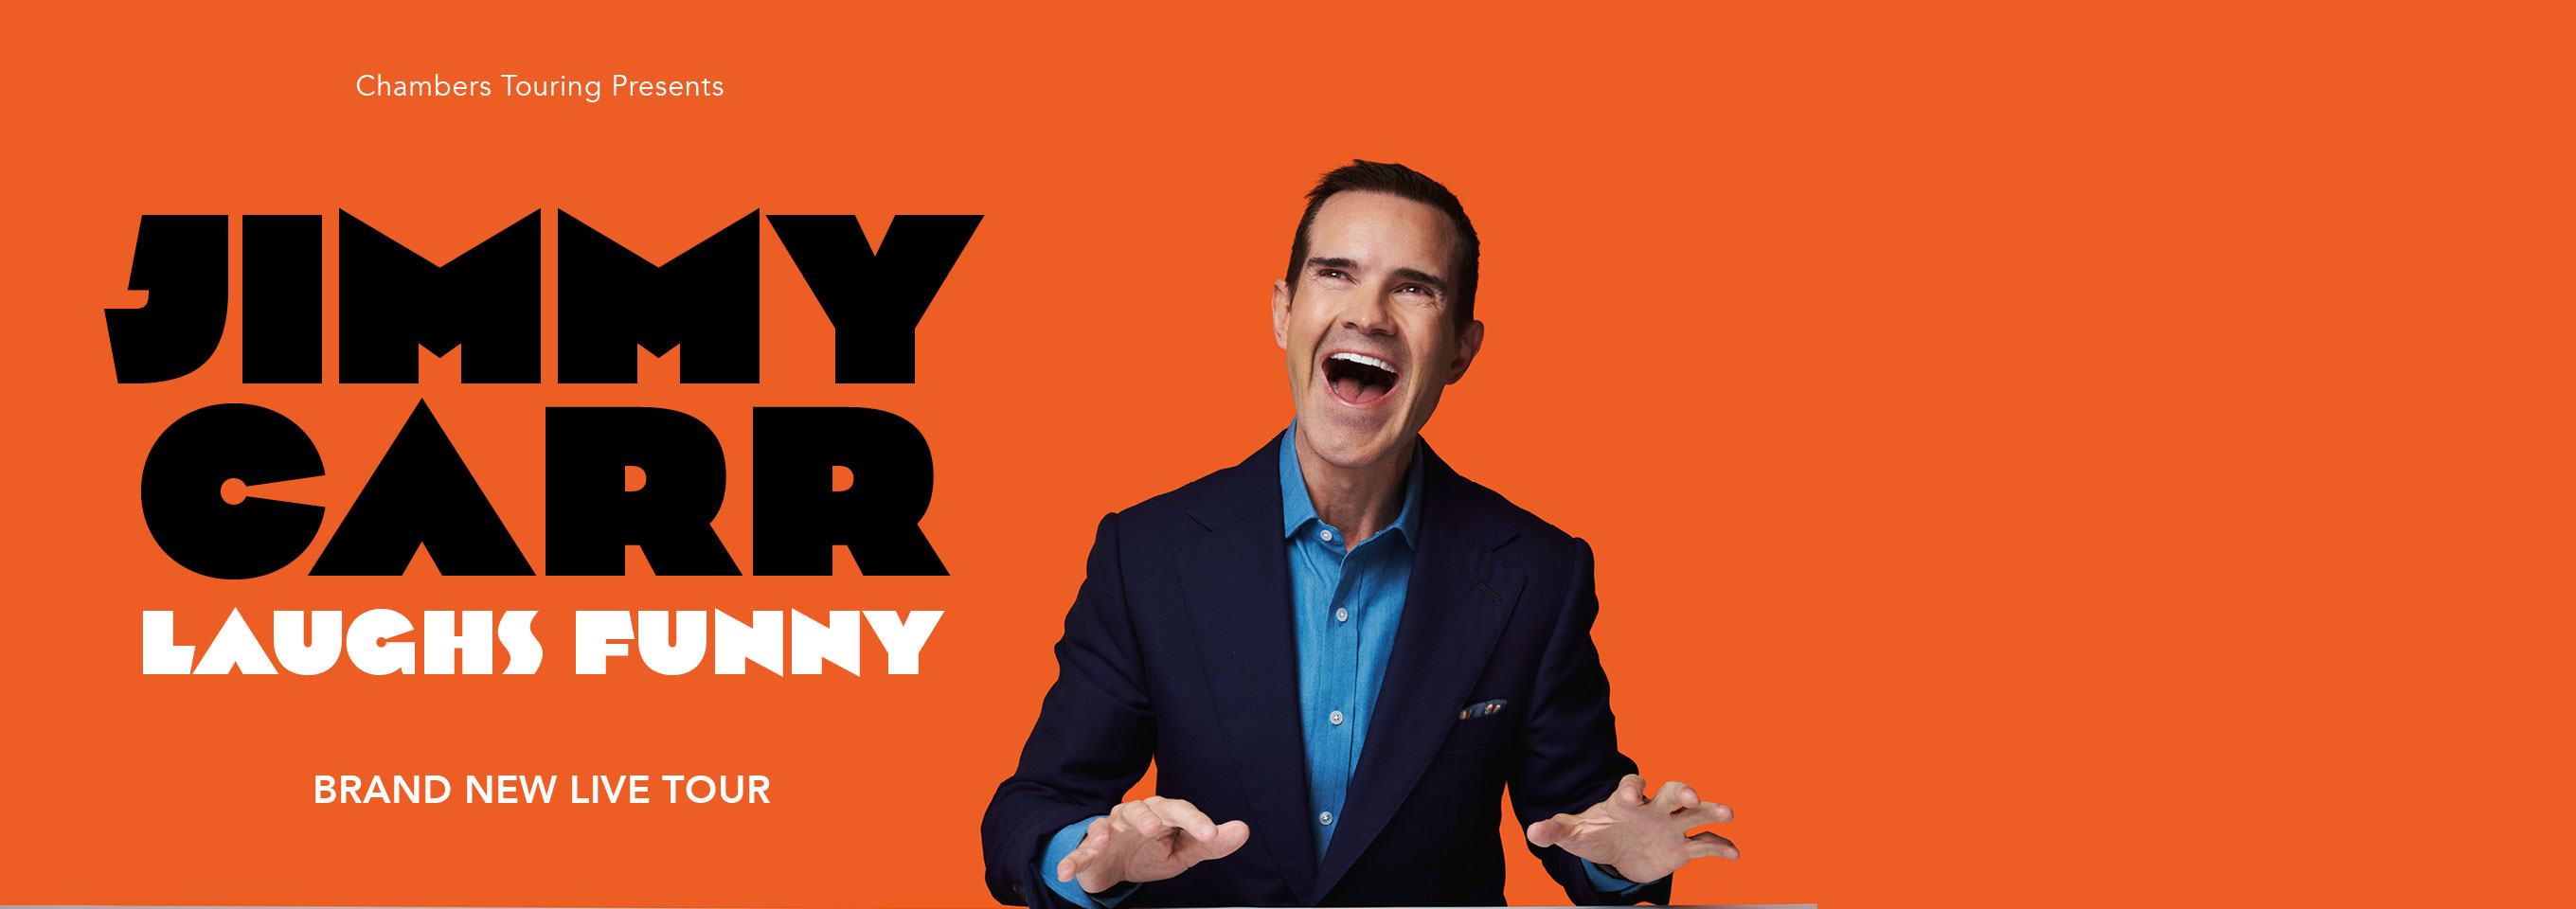 Jimmy Carr: Laughs Funny hero image